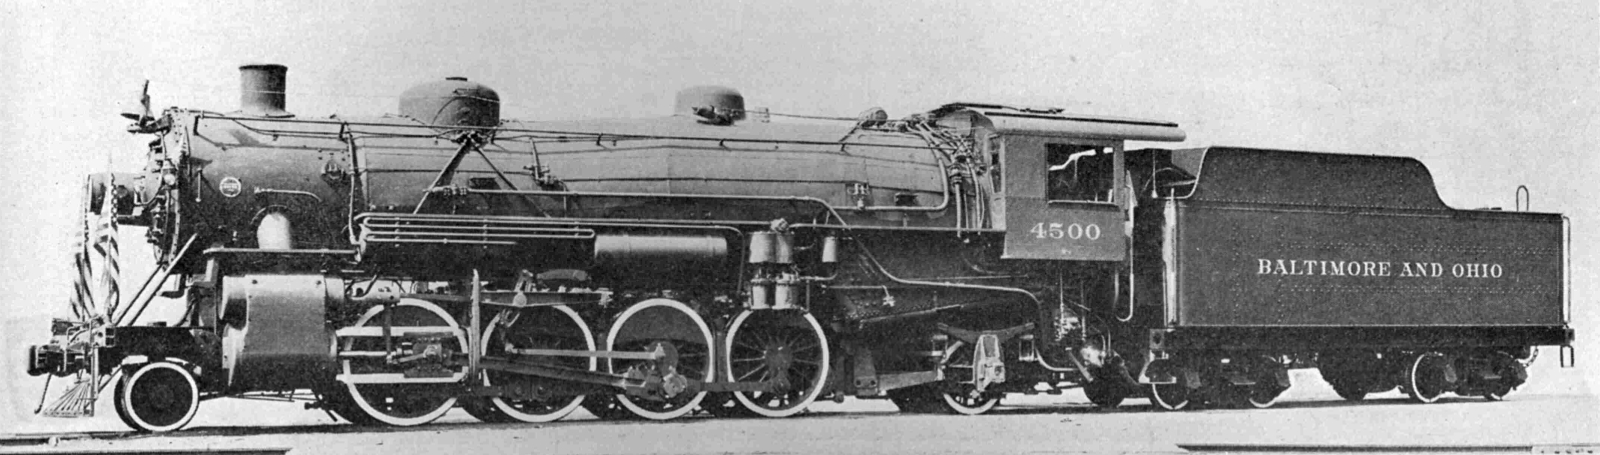 The Baltimore and Ohio Q3 No. 4500 was the first Light Mikado